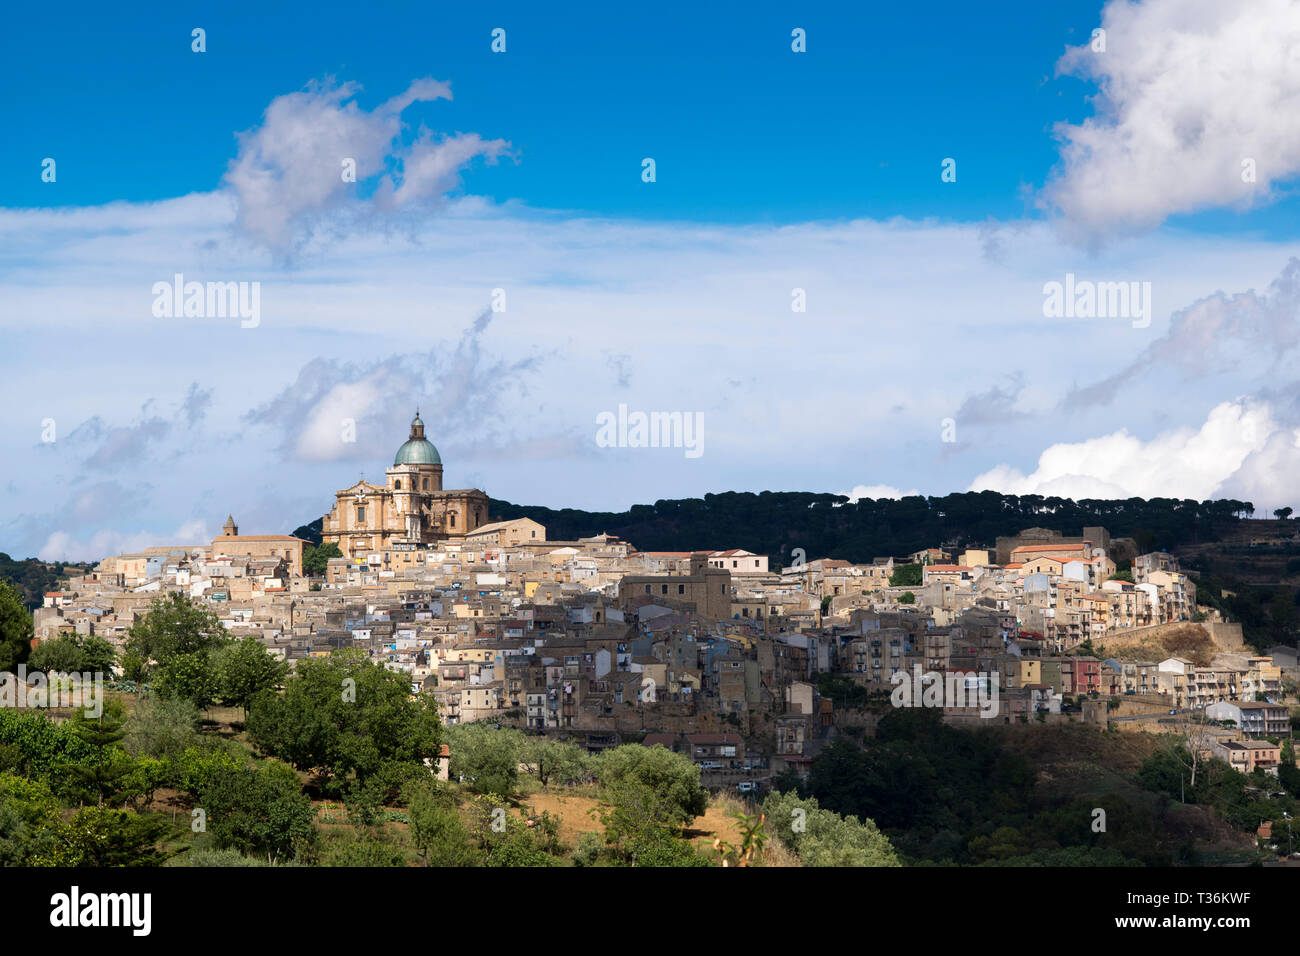 Ancient hill town of Piazza Armerina, Sicily, Italy Stock Photo